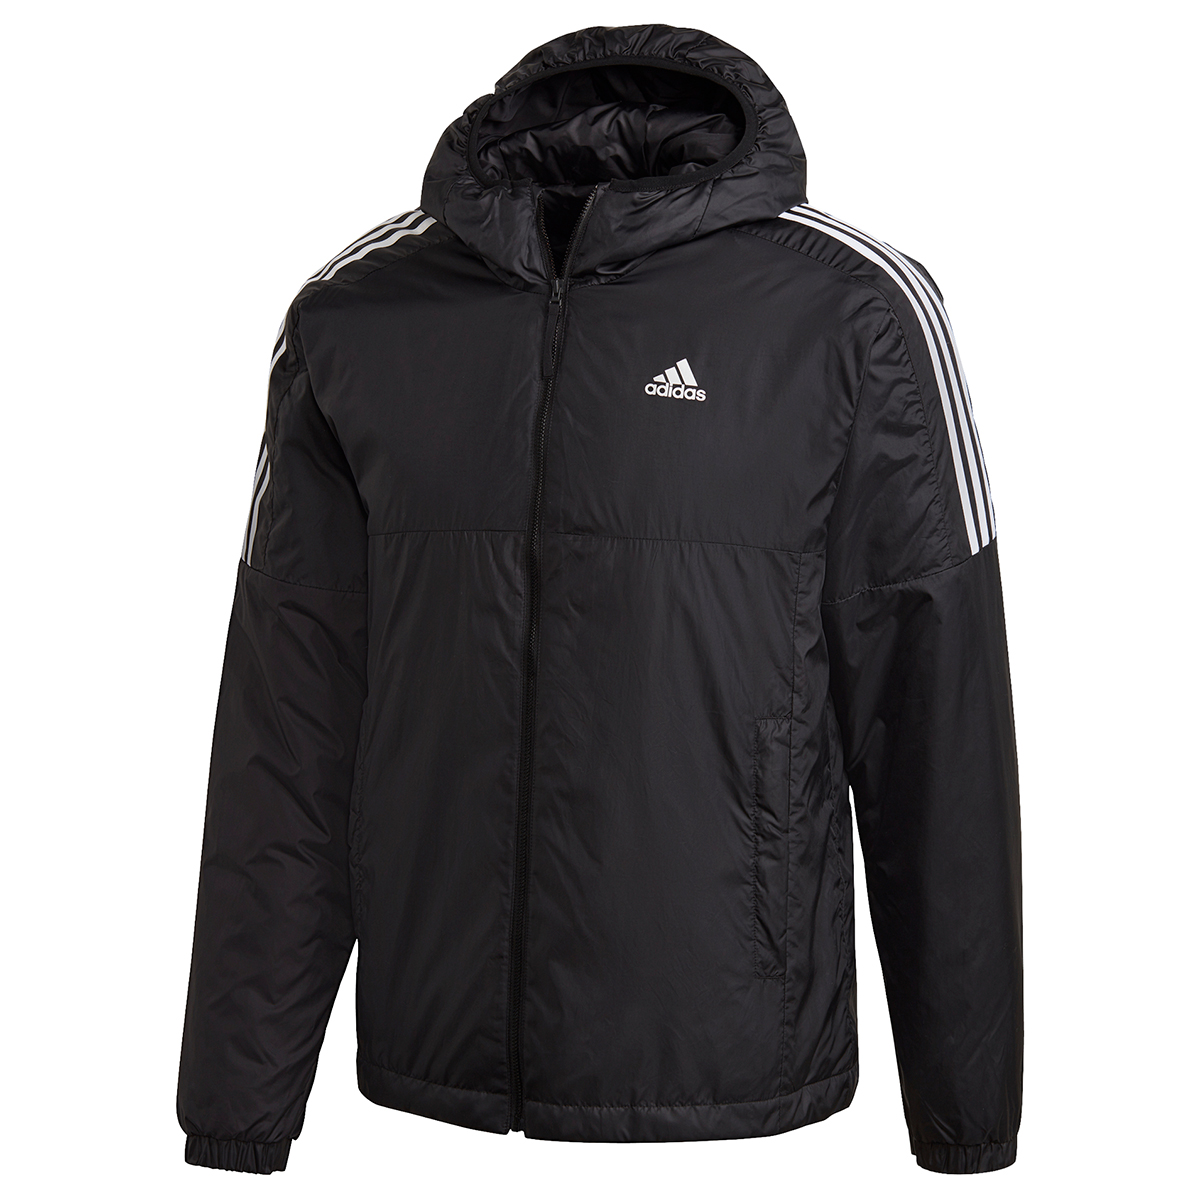 Adidas Men's Essentials Insulated Hooded Jacket